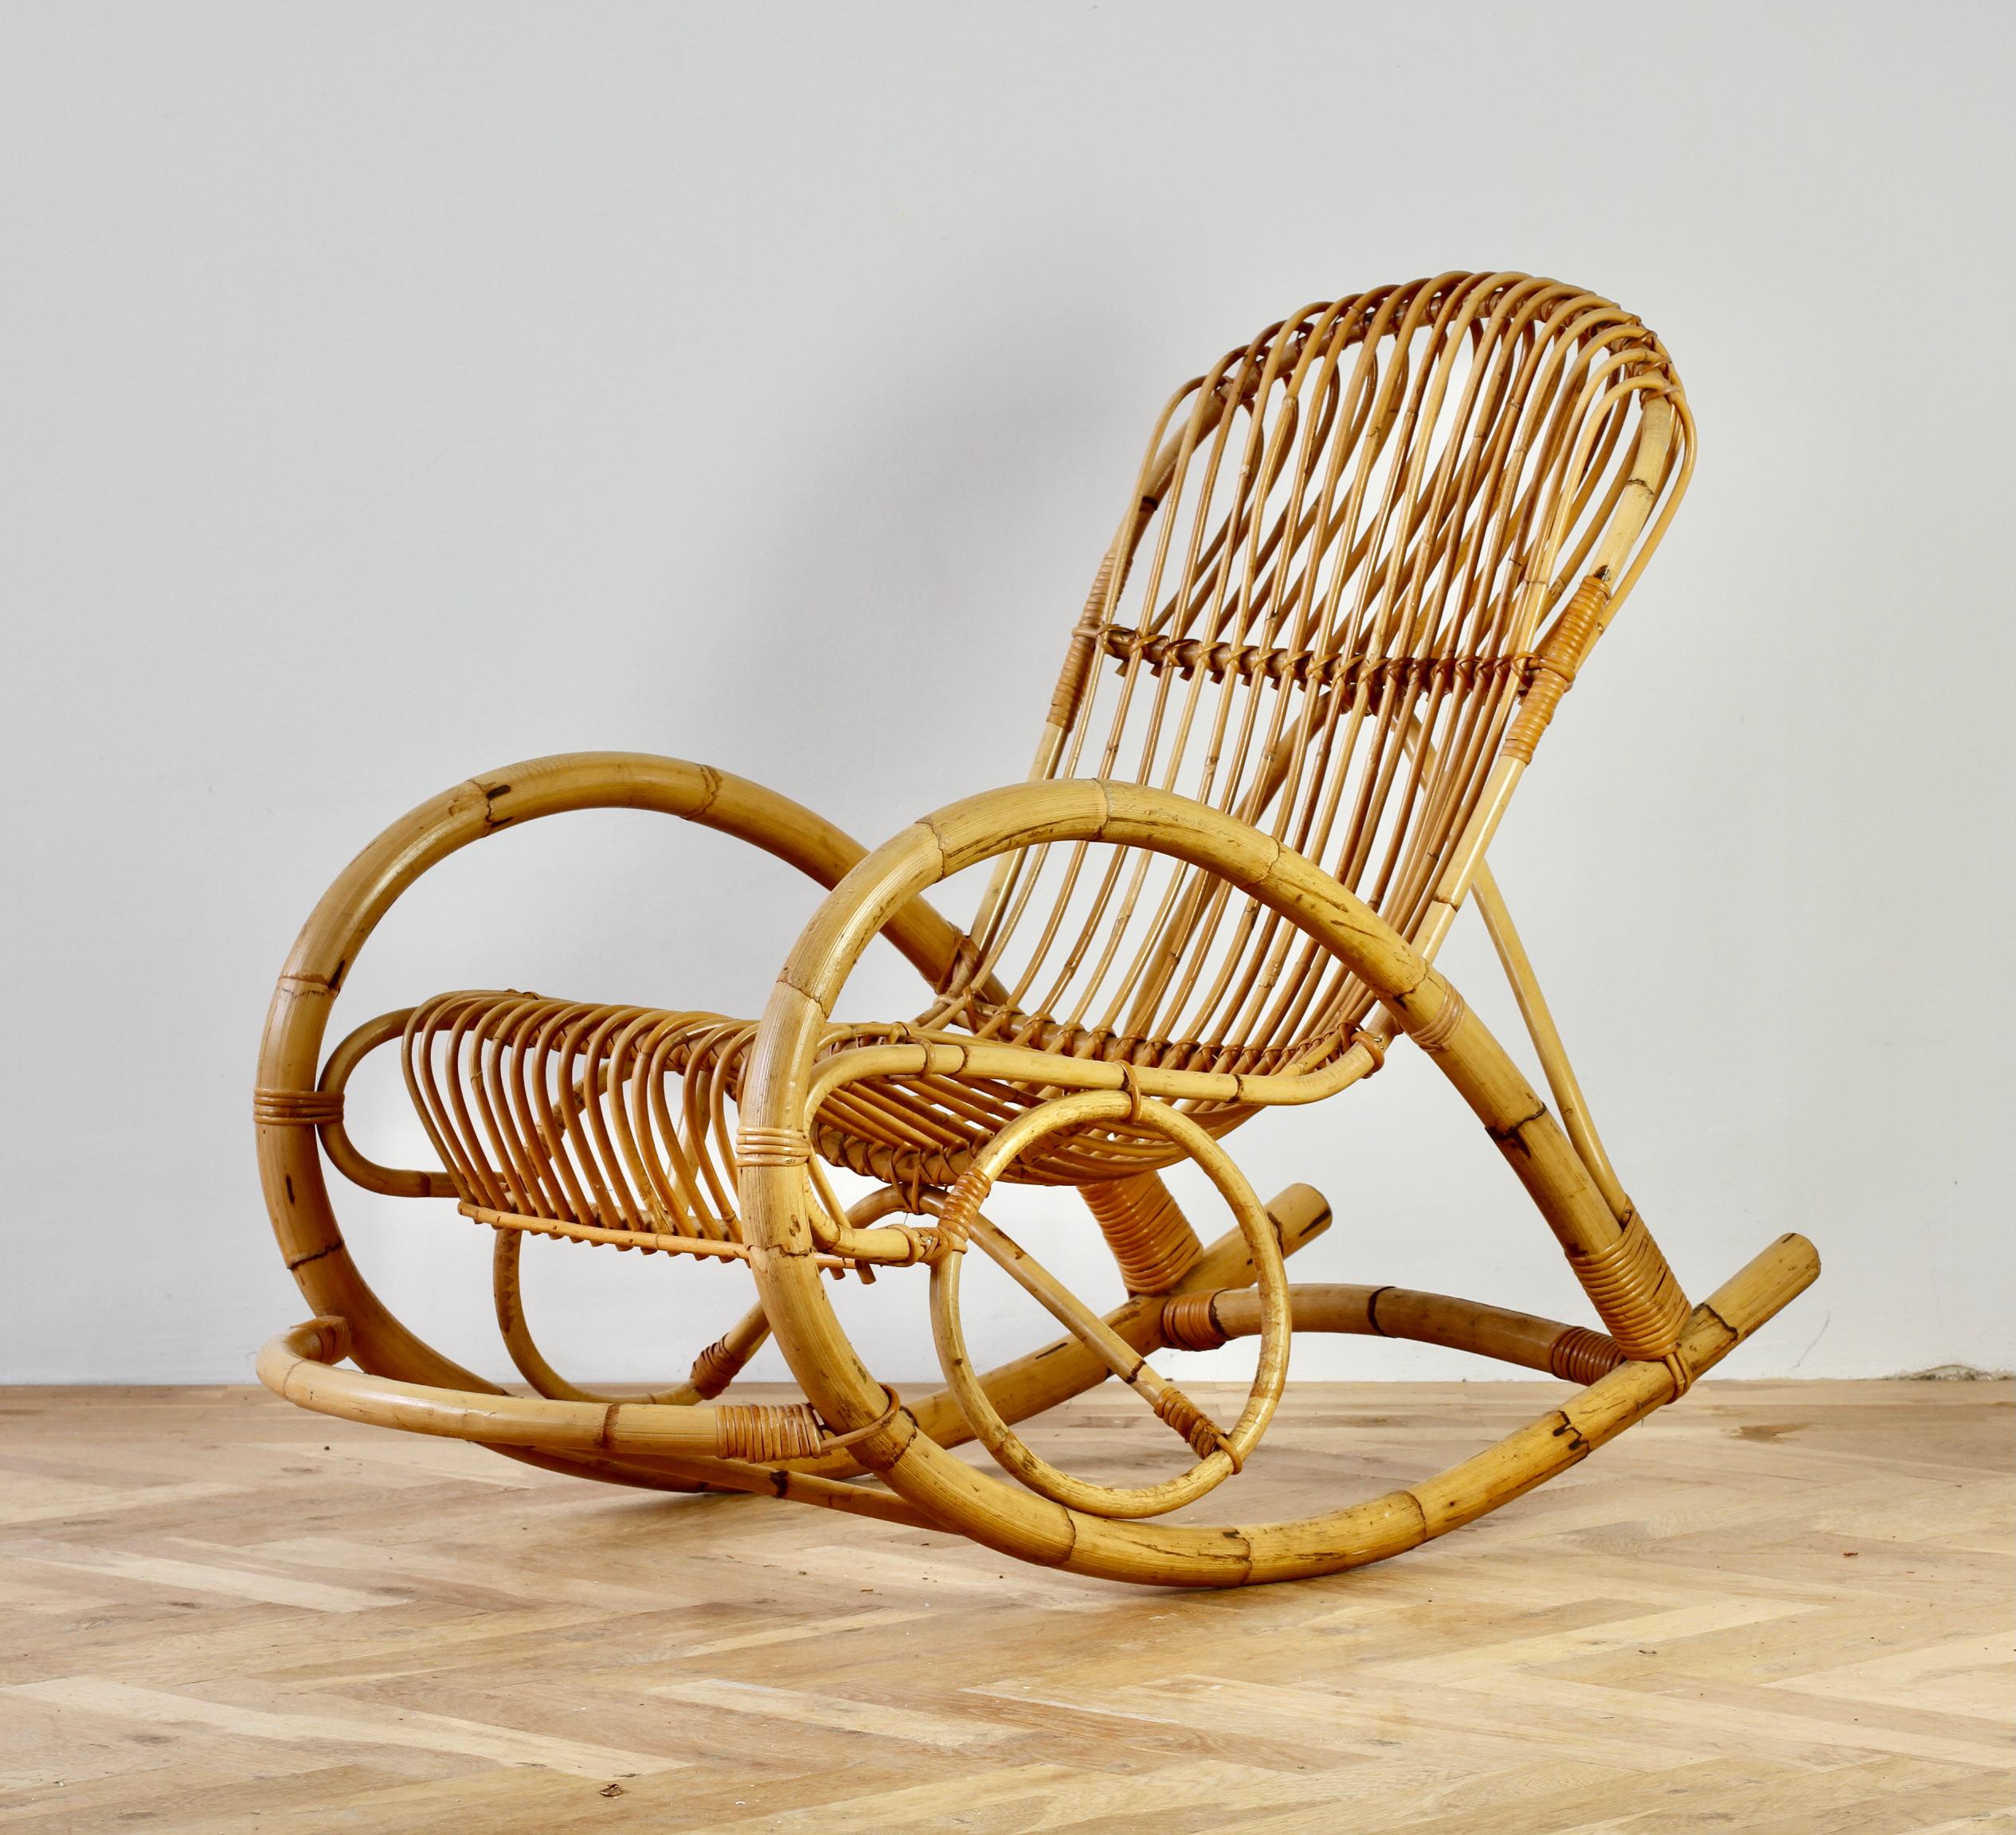 Franco Albini style vintage mid-century bent bamboo & rattan high backed rocking or lounge chair. Beautiful design - very 1960s / 1970s and would make a lovely addition to any home, particularly any with the Boho, Scandinavian Modern or Mid-Century